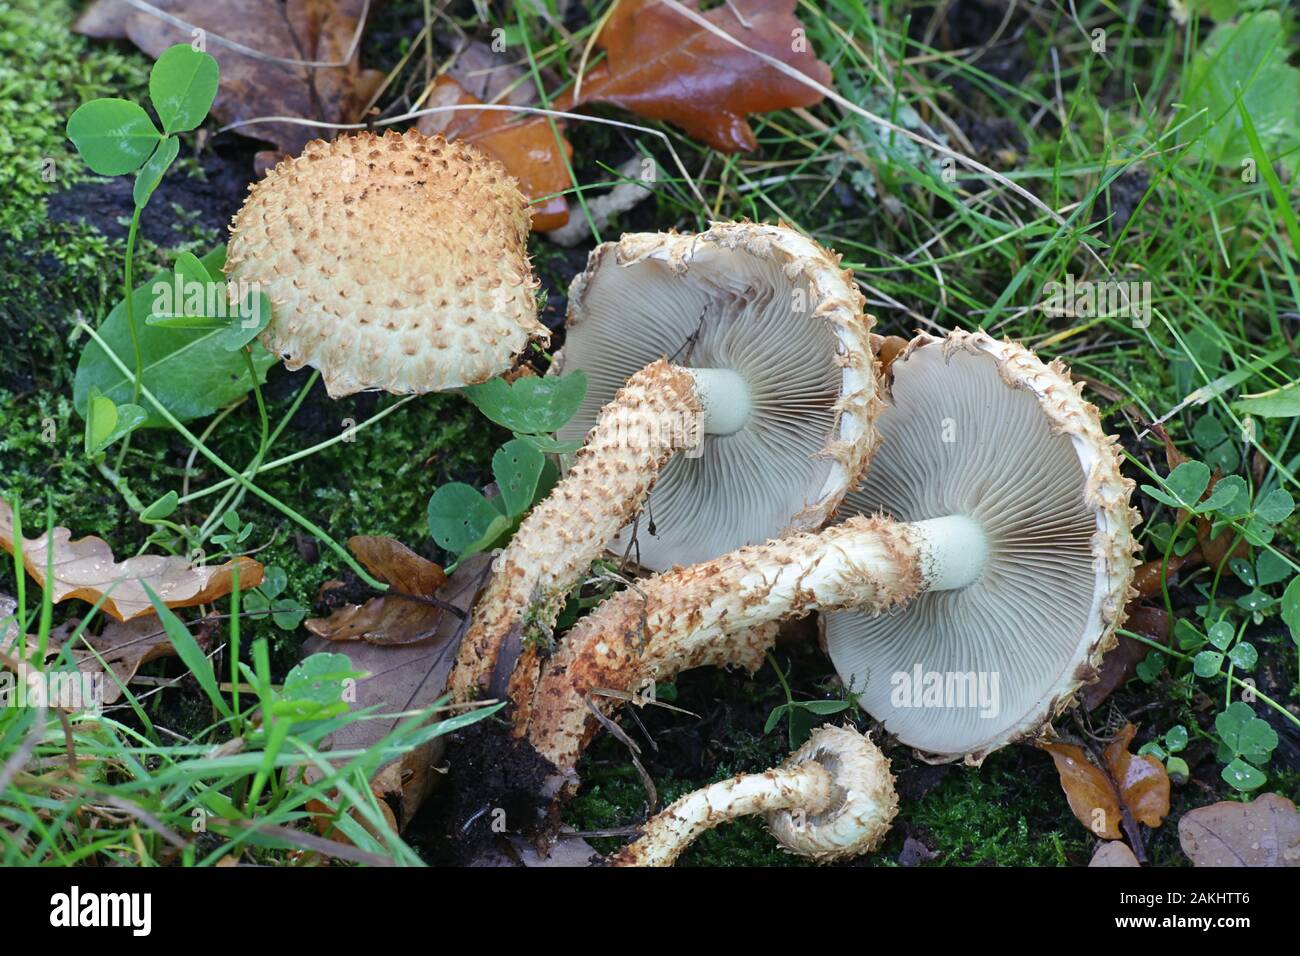 Pholiota squarrosa, commonly known as  shaggy scalycap, shaggy Pholiota, or the scaly Pholiota, wild mushrooms from Finland Stock Photo